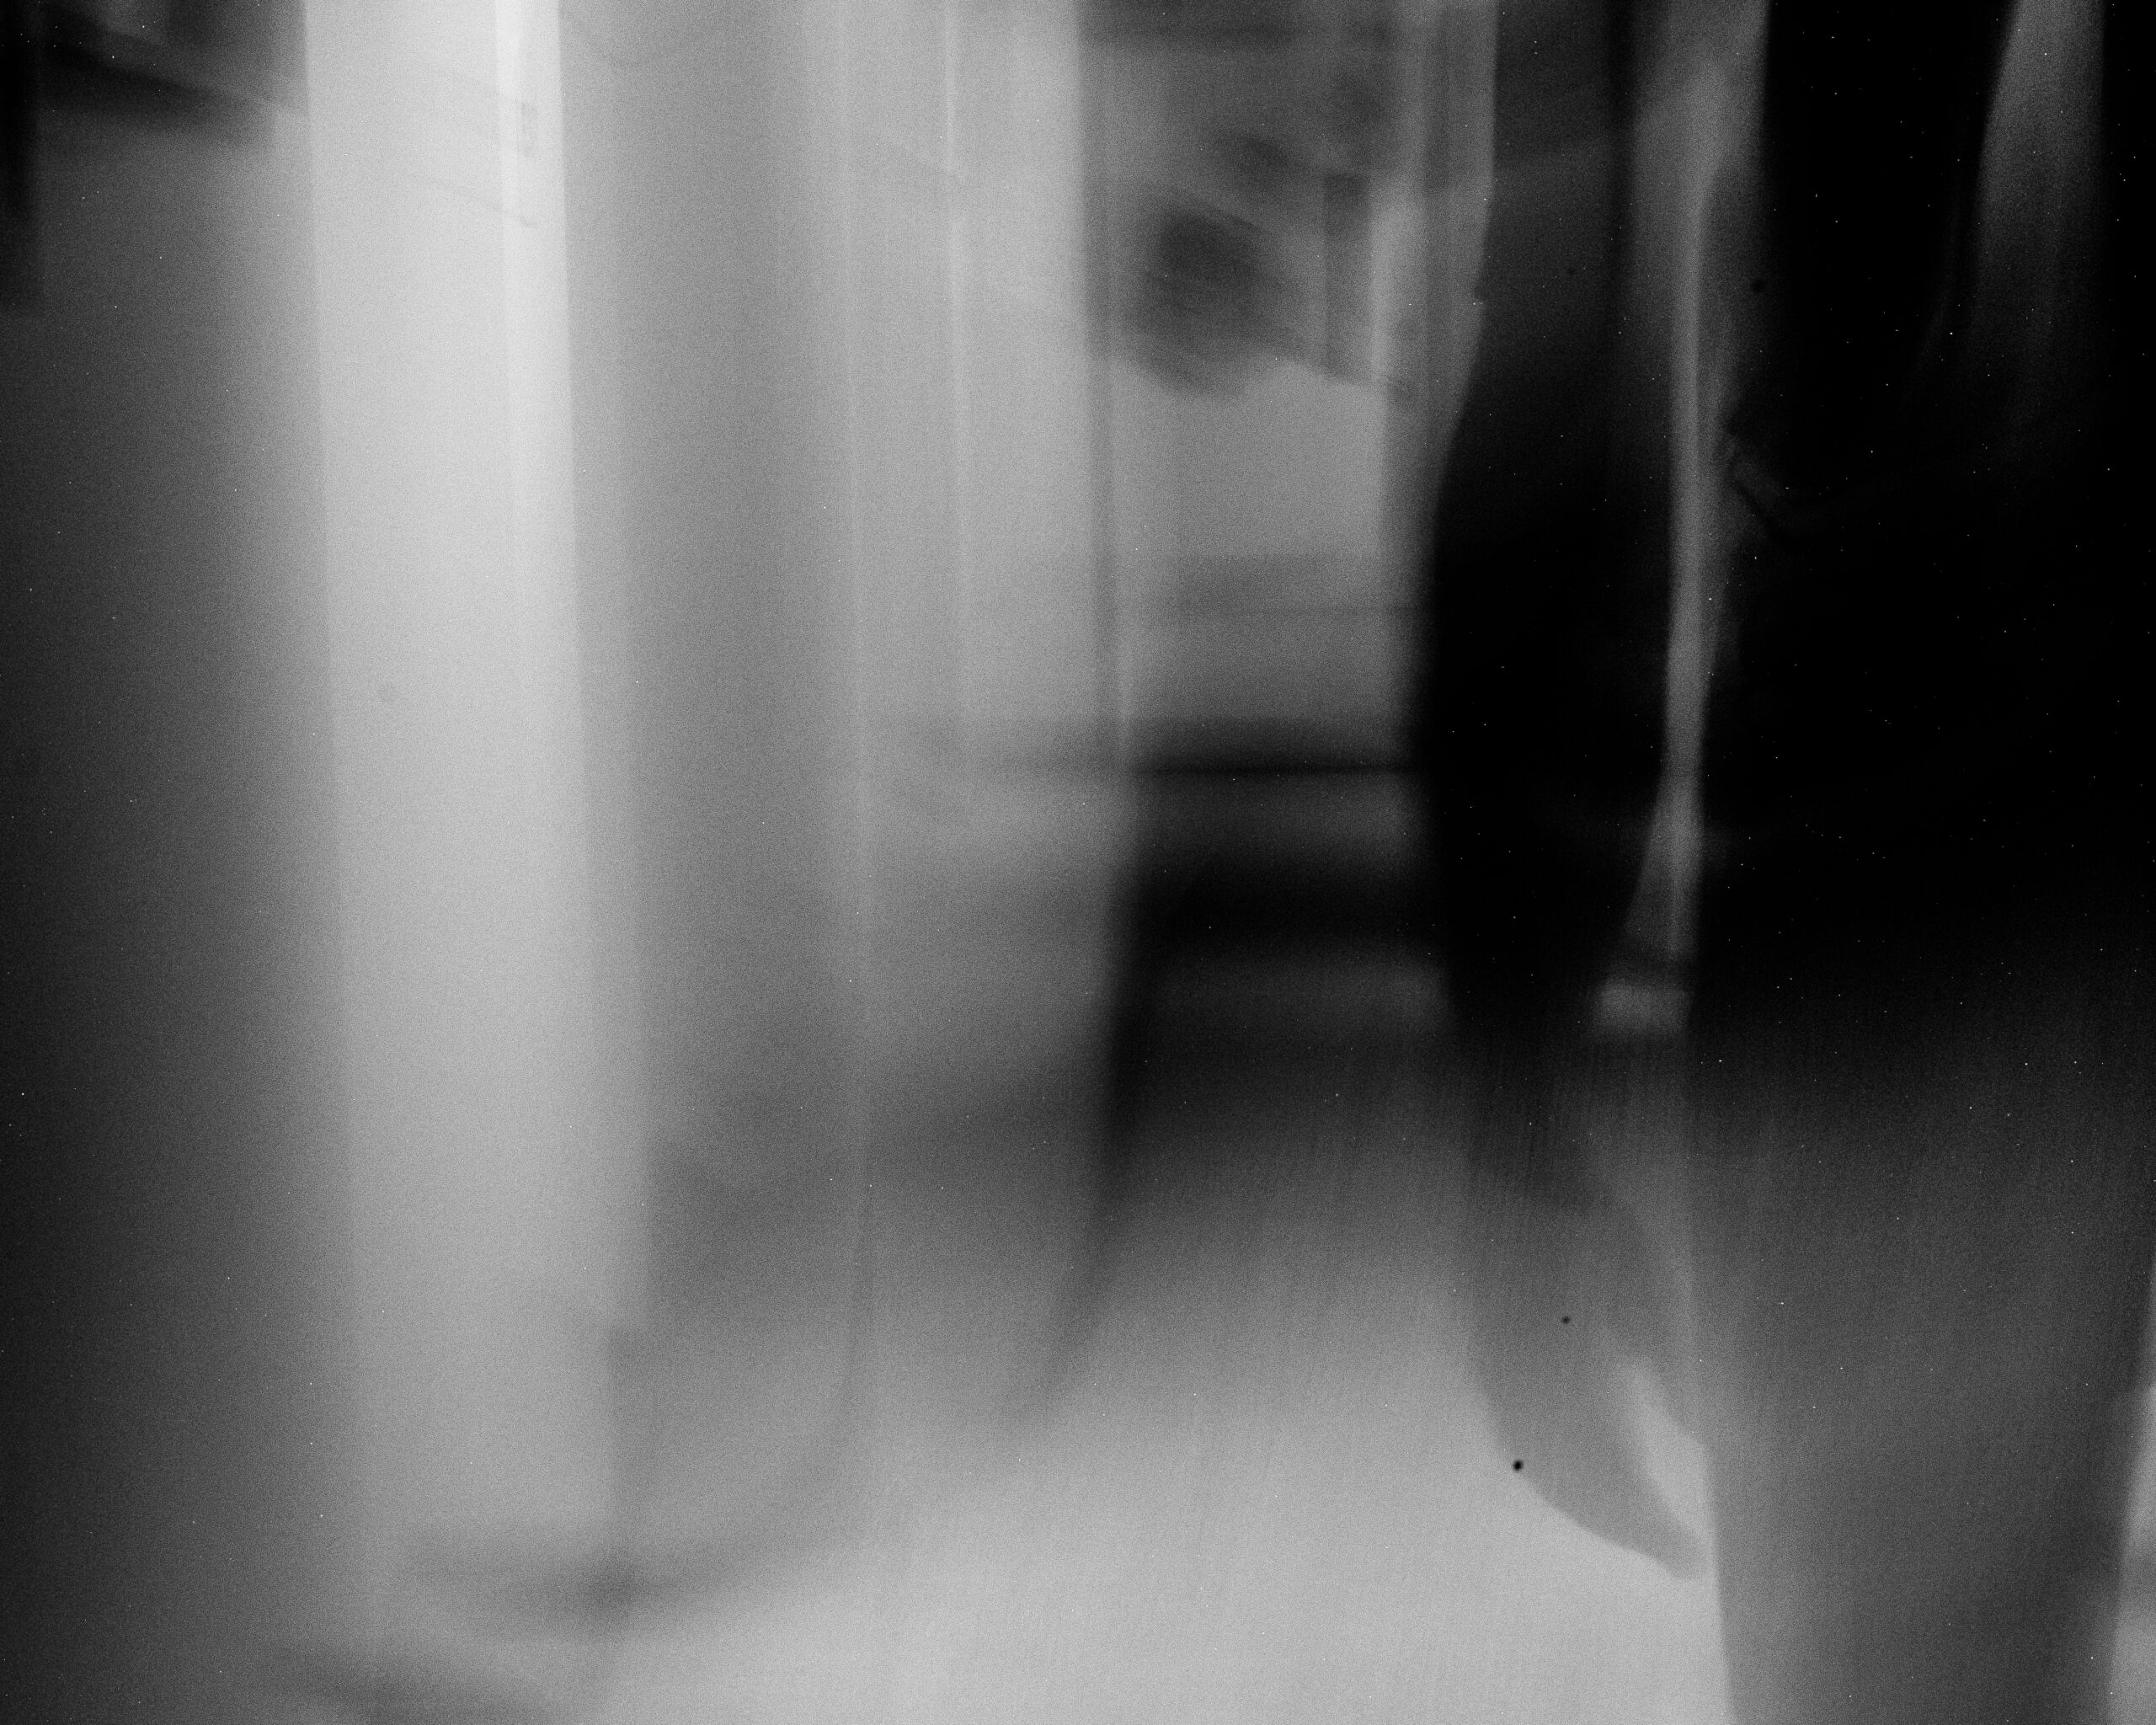 A silhouette of Rob Faubion seen walking through a hallway. The photo is stylishly blurred and black and white, giving it a ghostly feeling.